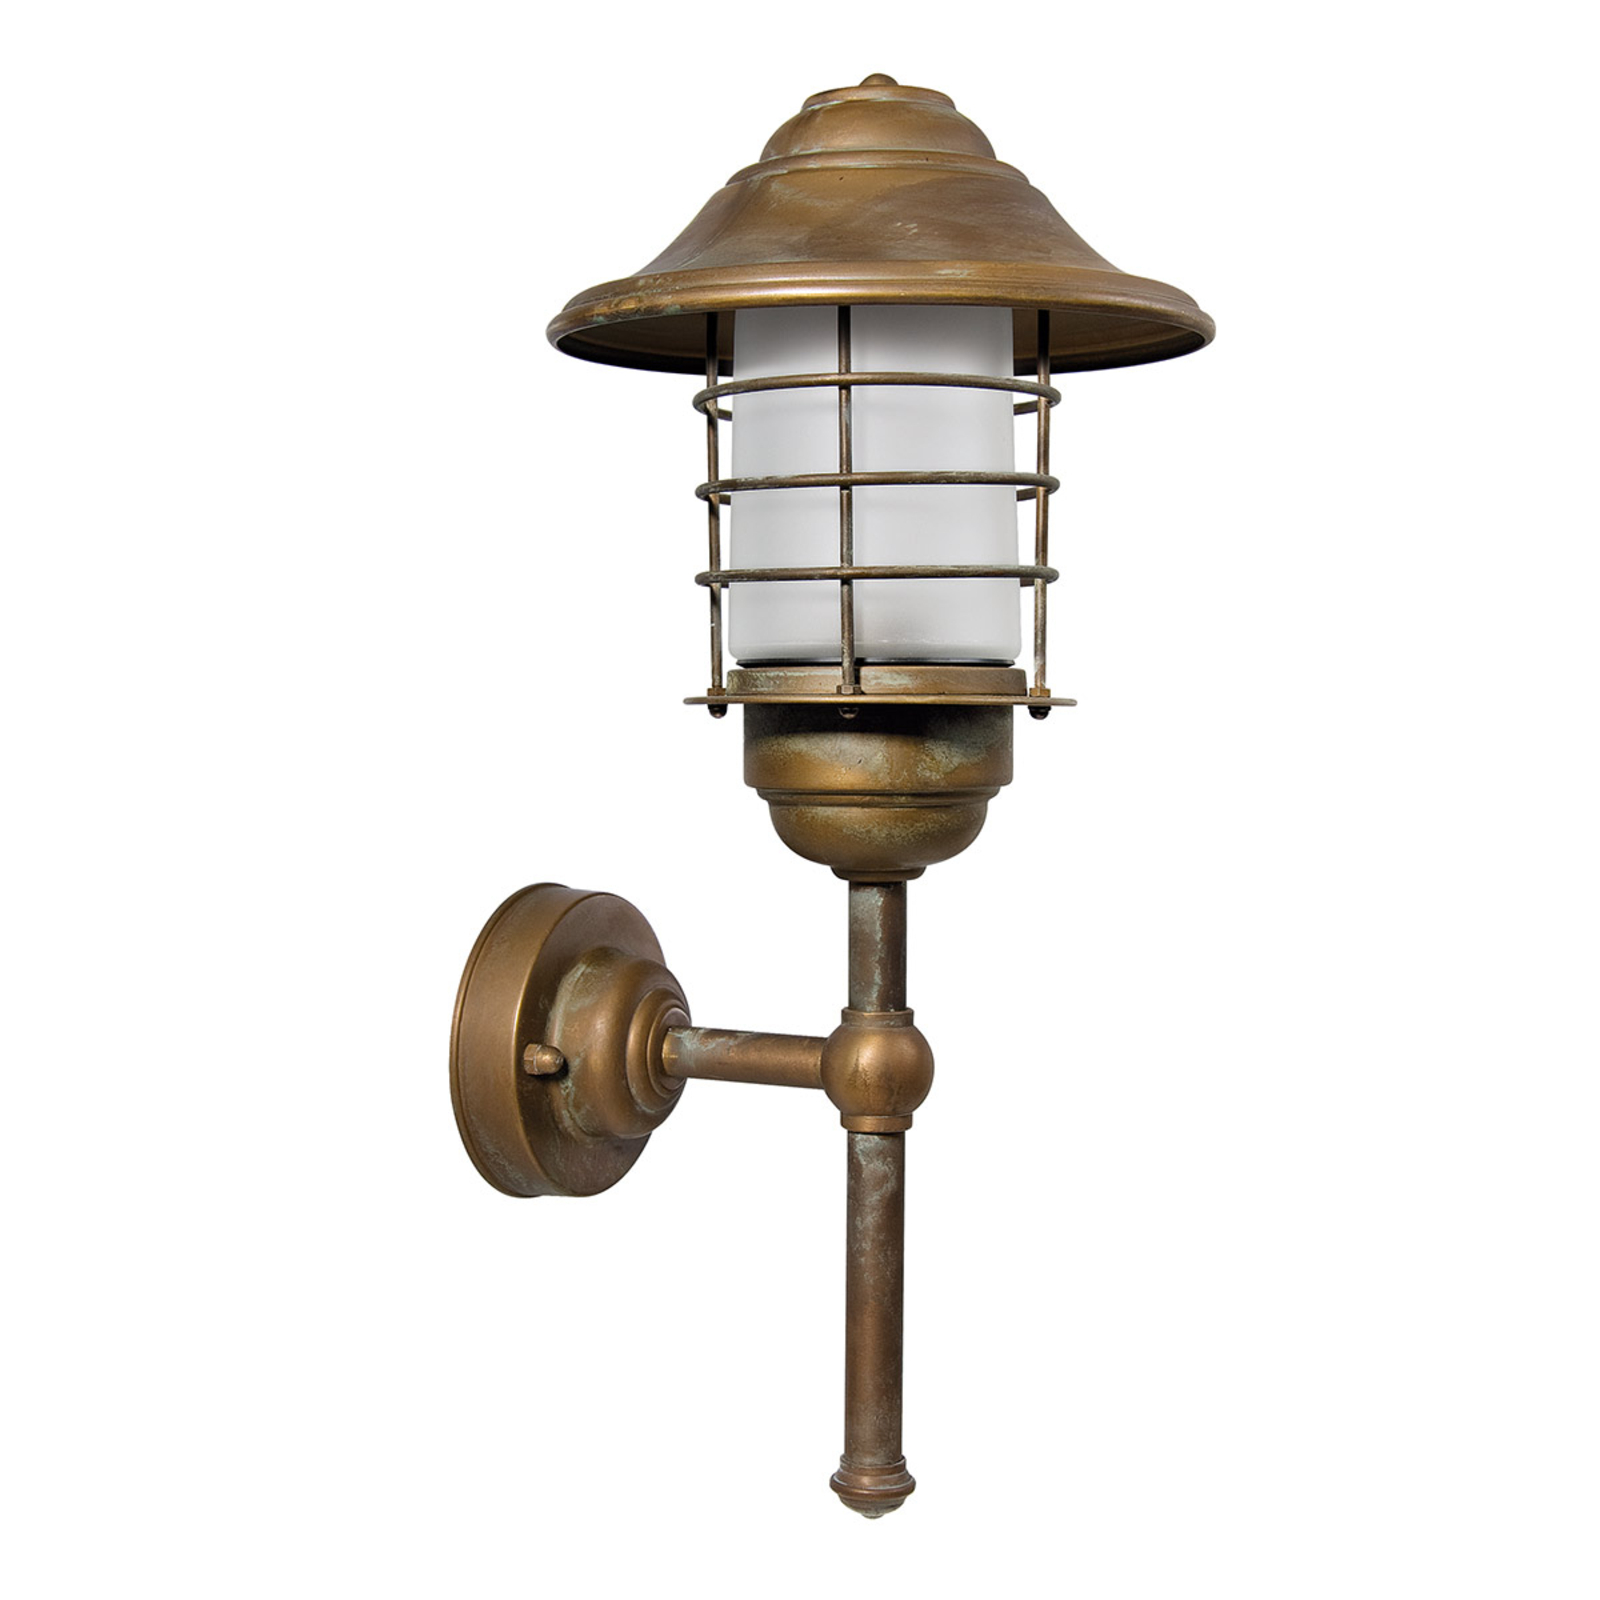 Chiara straight outdoor wall light - seawater resistant